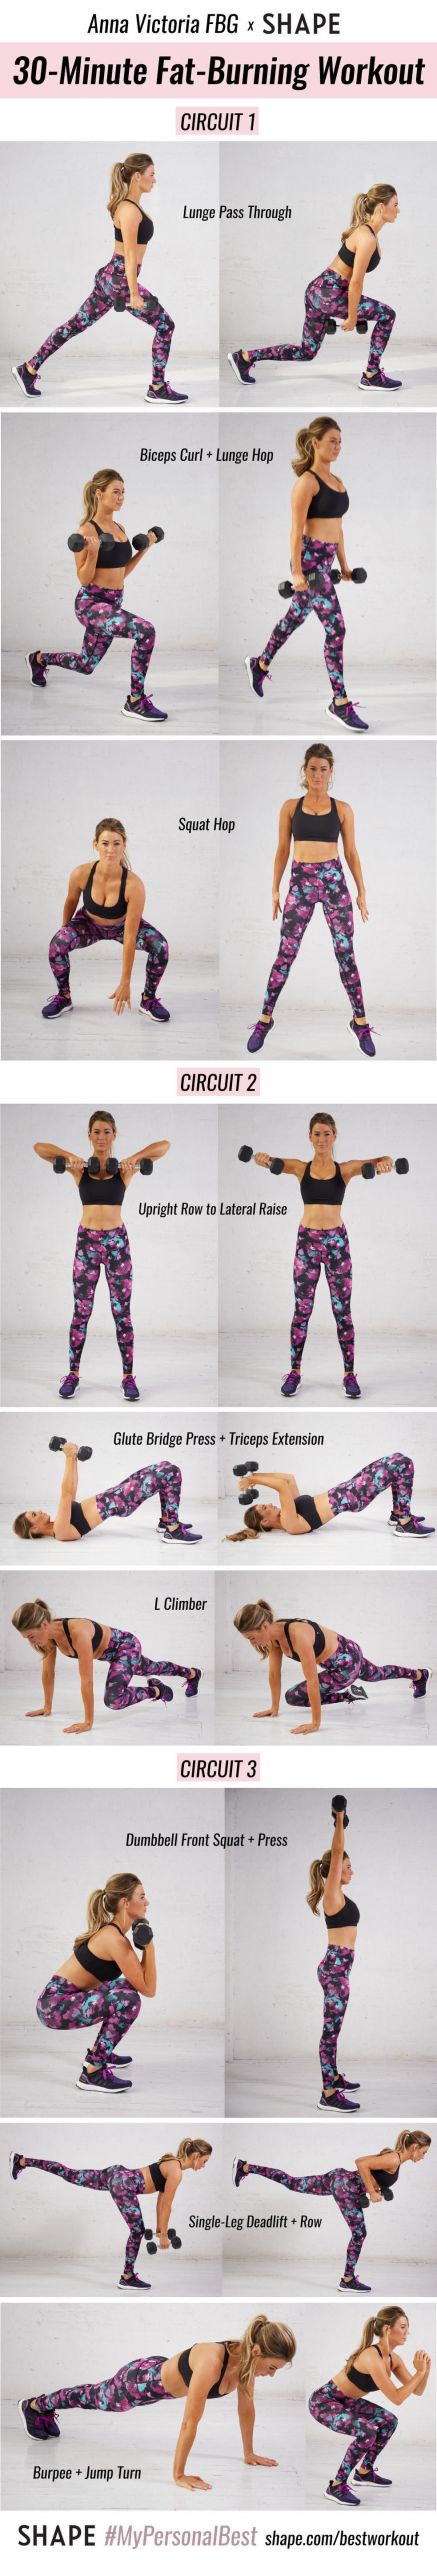 Fat Burning Workout At The Gym Weights
 This Fat Burning Workout By Anna Victoria Will Help You